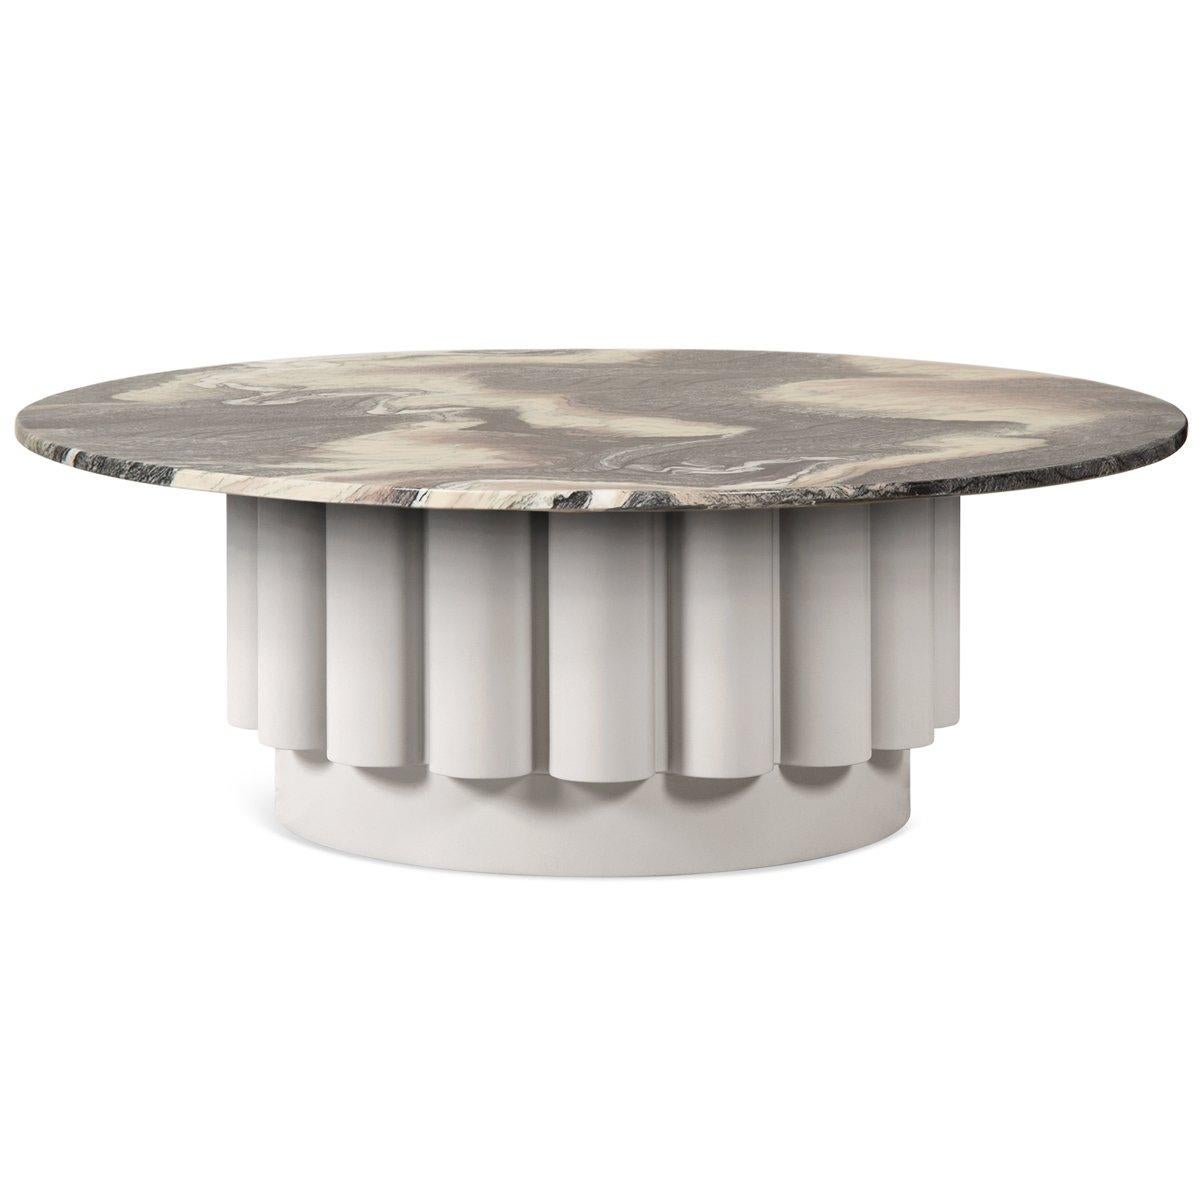 For those wanting a stunning center-piece for a living room or lobby. A fluted base in smoke ember lacquer finish is the most distinctive design element of this customizable coffee table. The posh Ravine stone marble top is dramatic and naturally